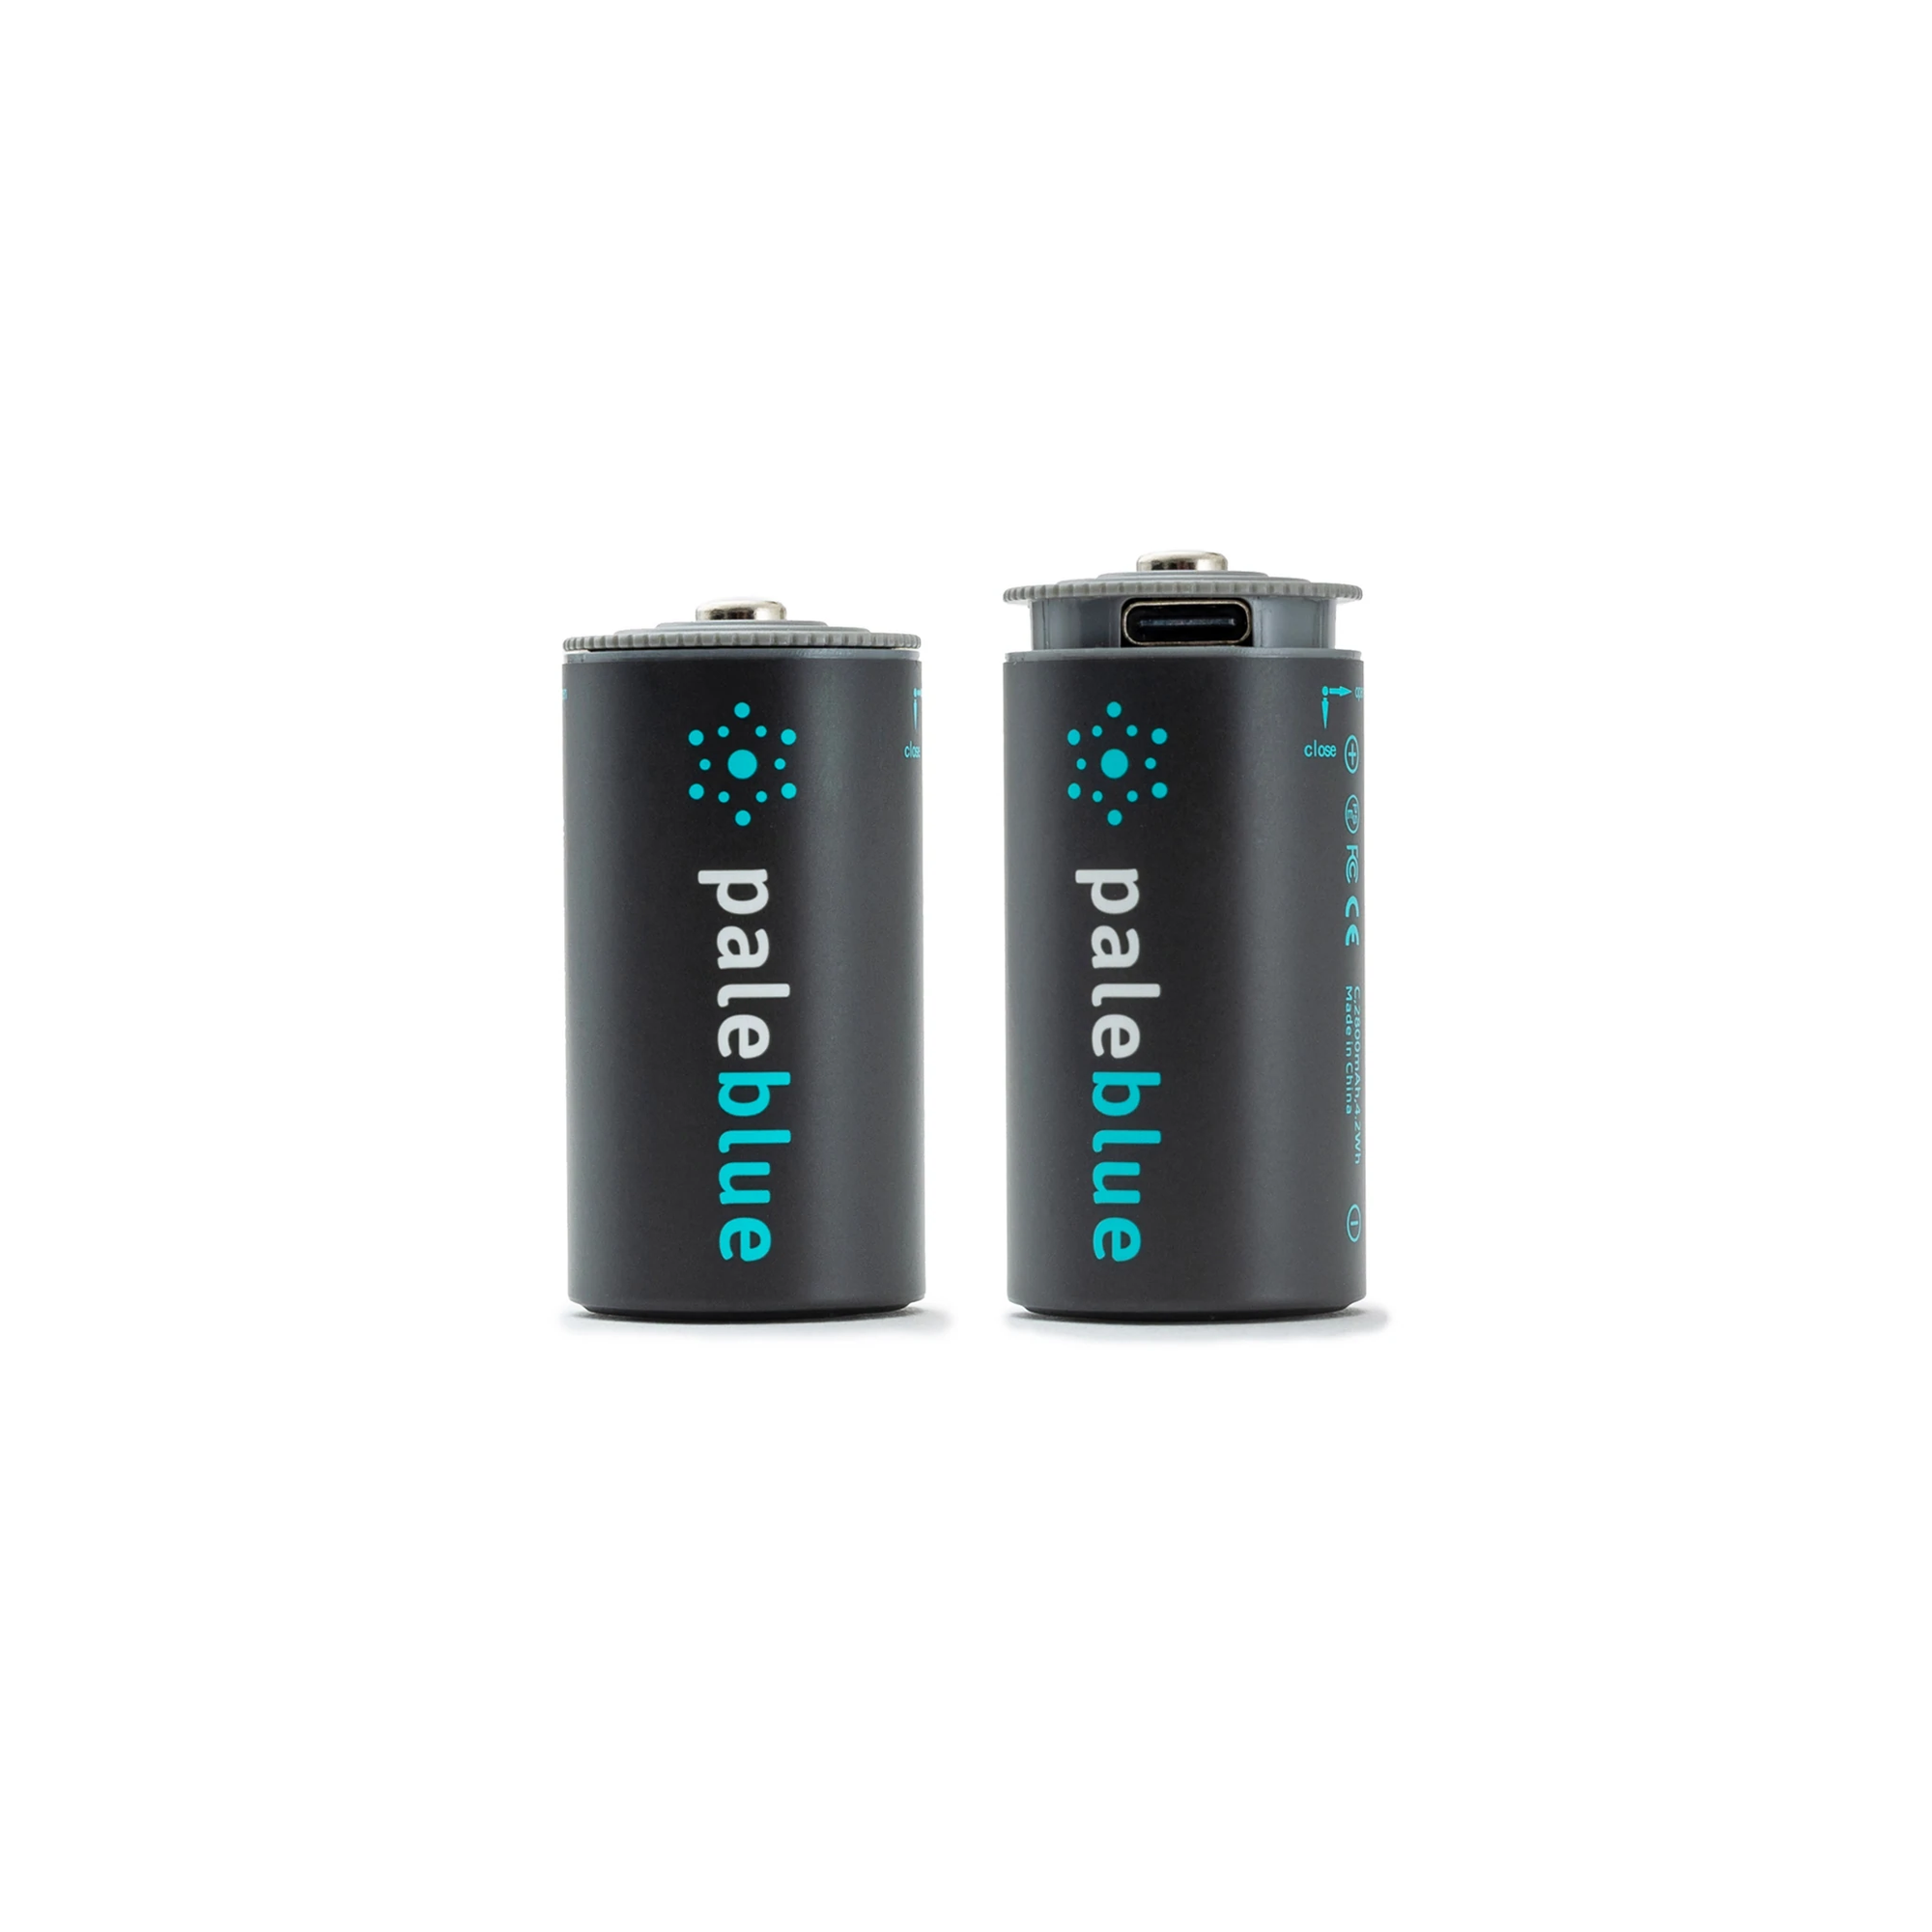 Piles rechargeables USB AA/LR06 - Solar Brother